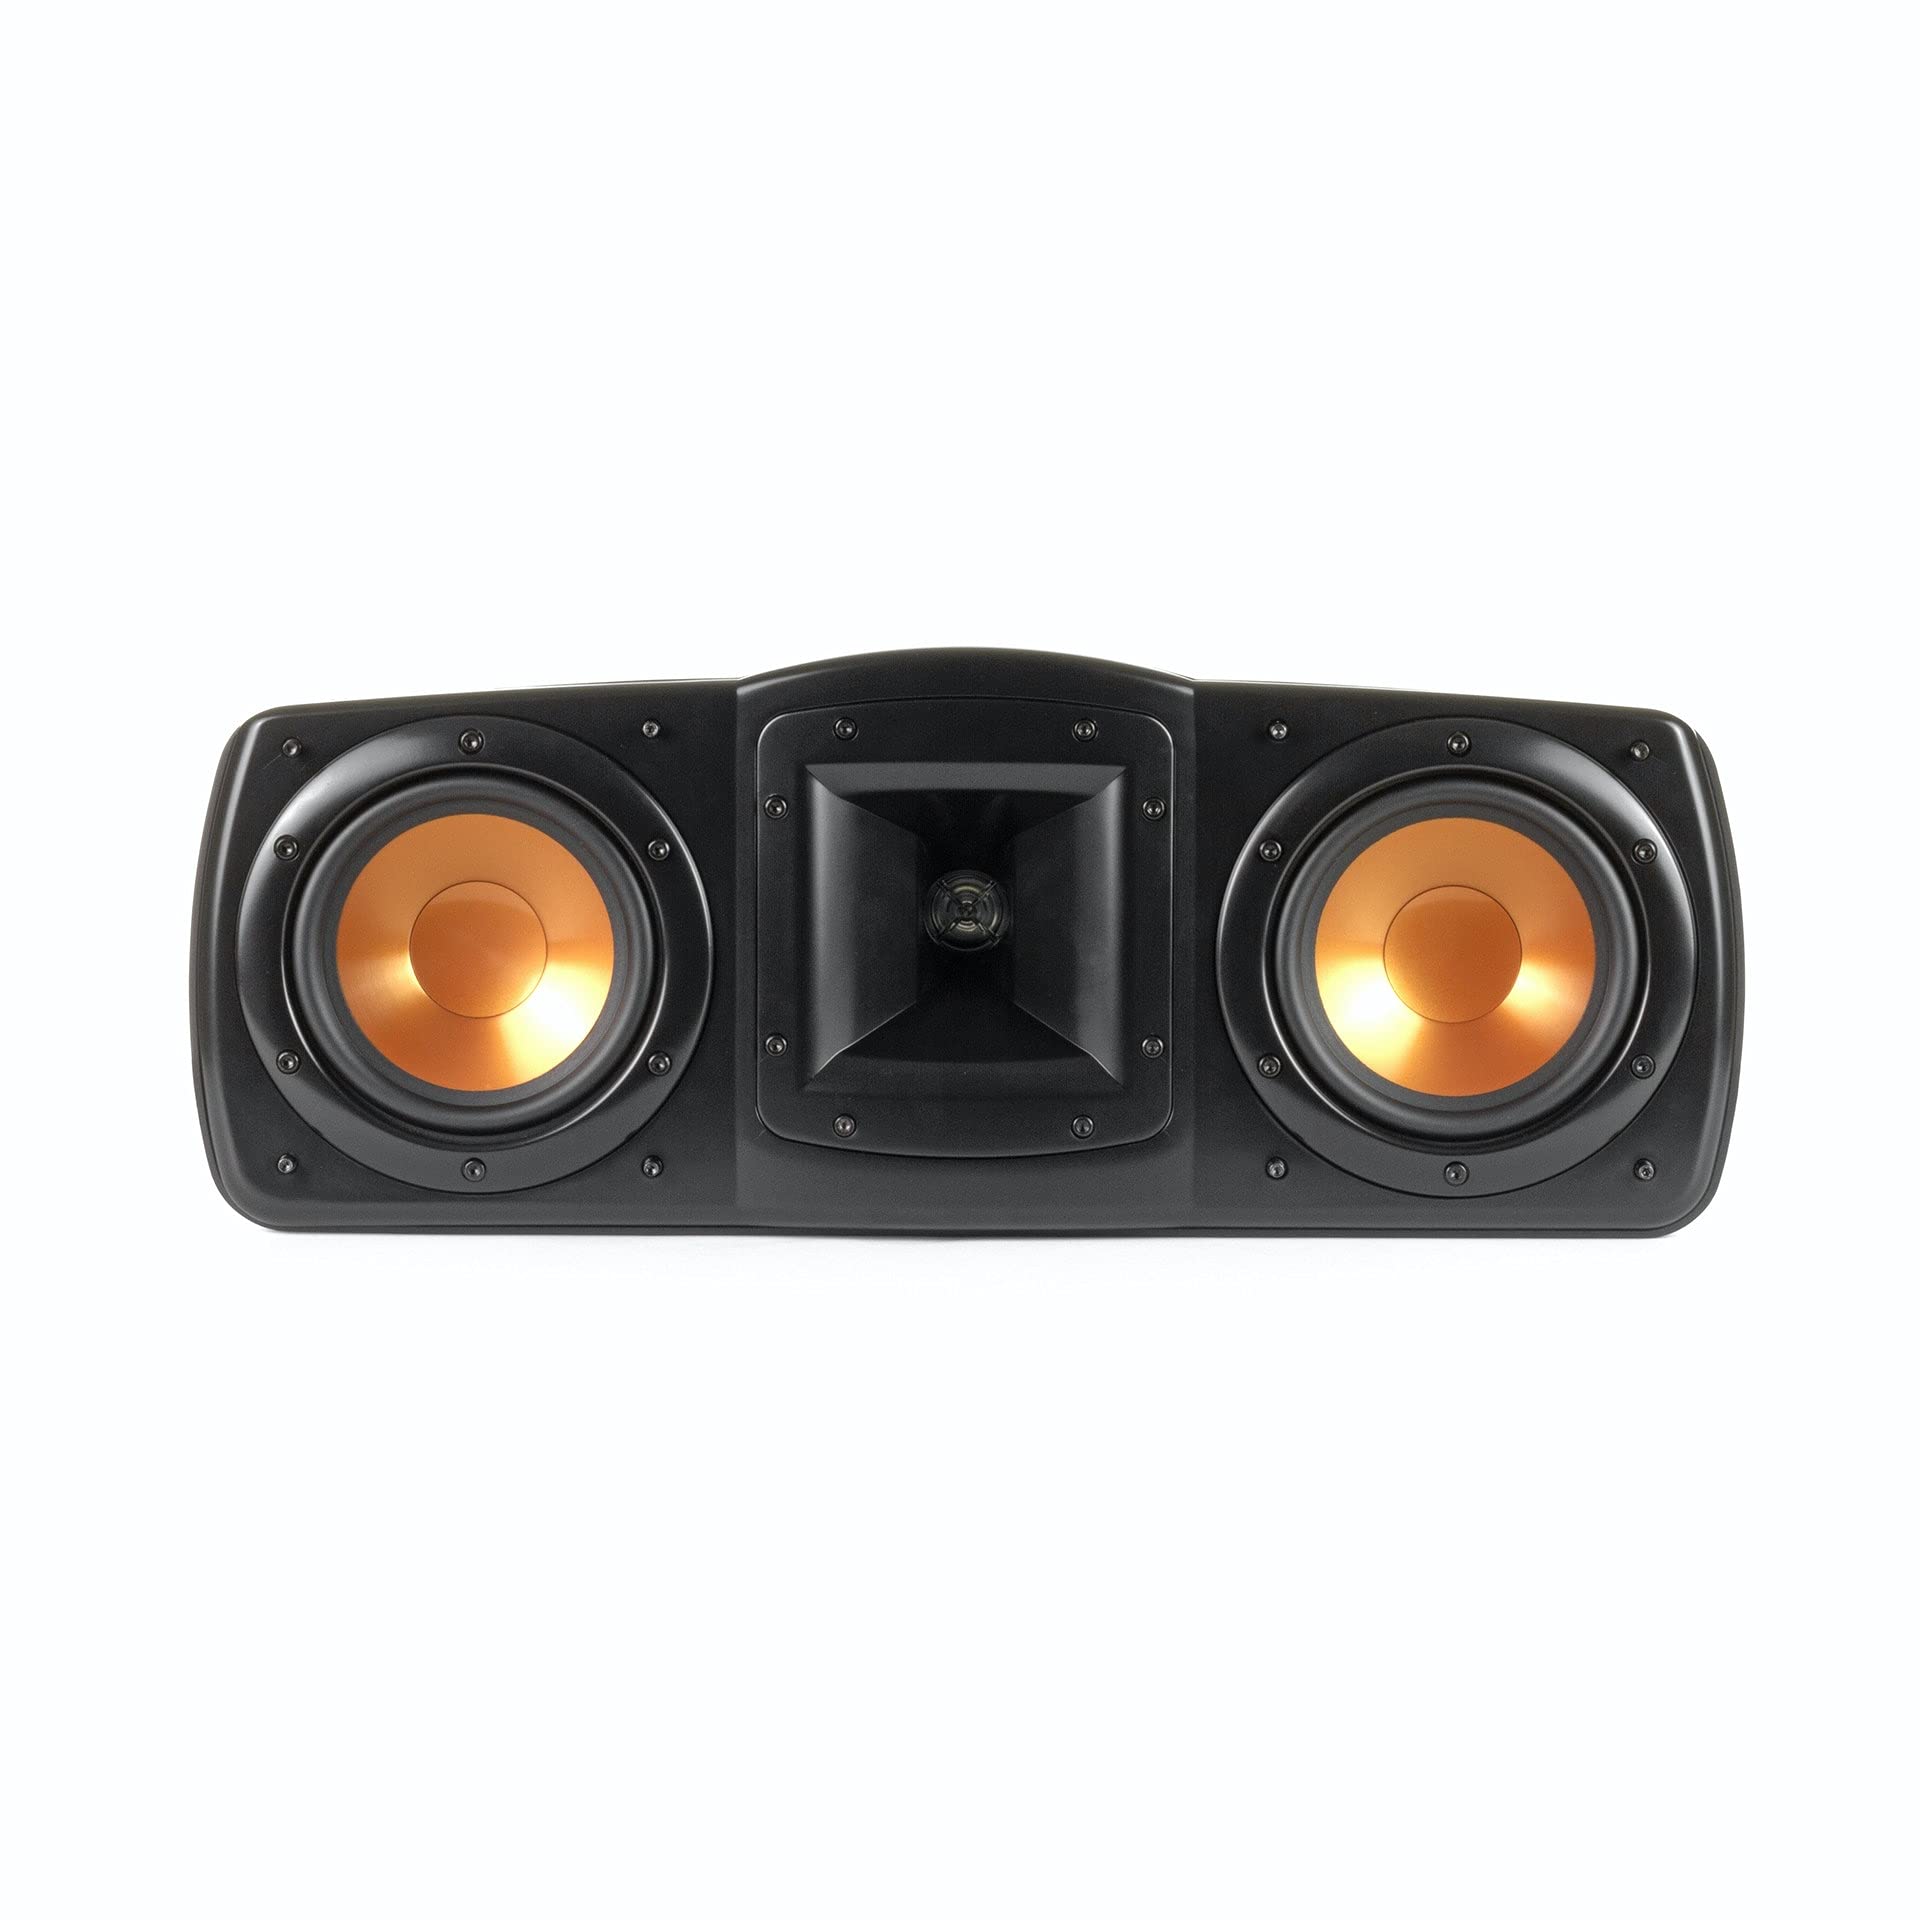 Klipsch Synergy Black Label F-200 5.1 Powerful and Efficient Home Theater System with 10